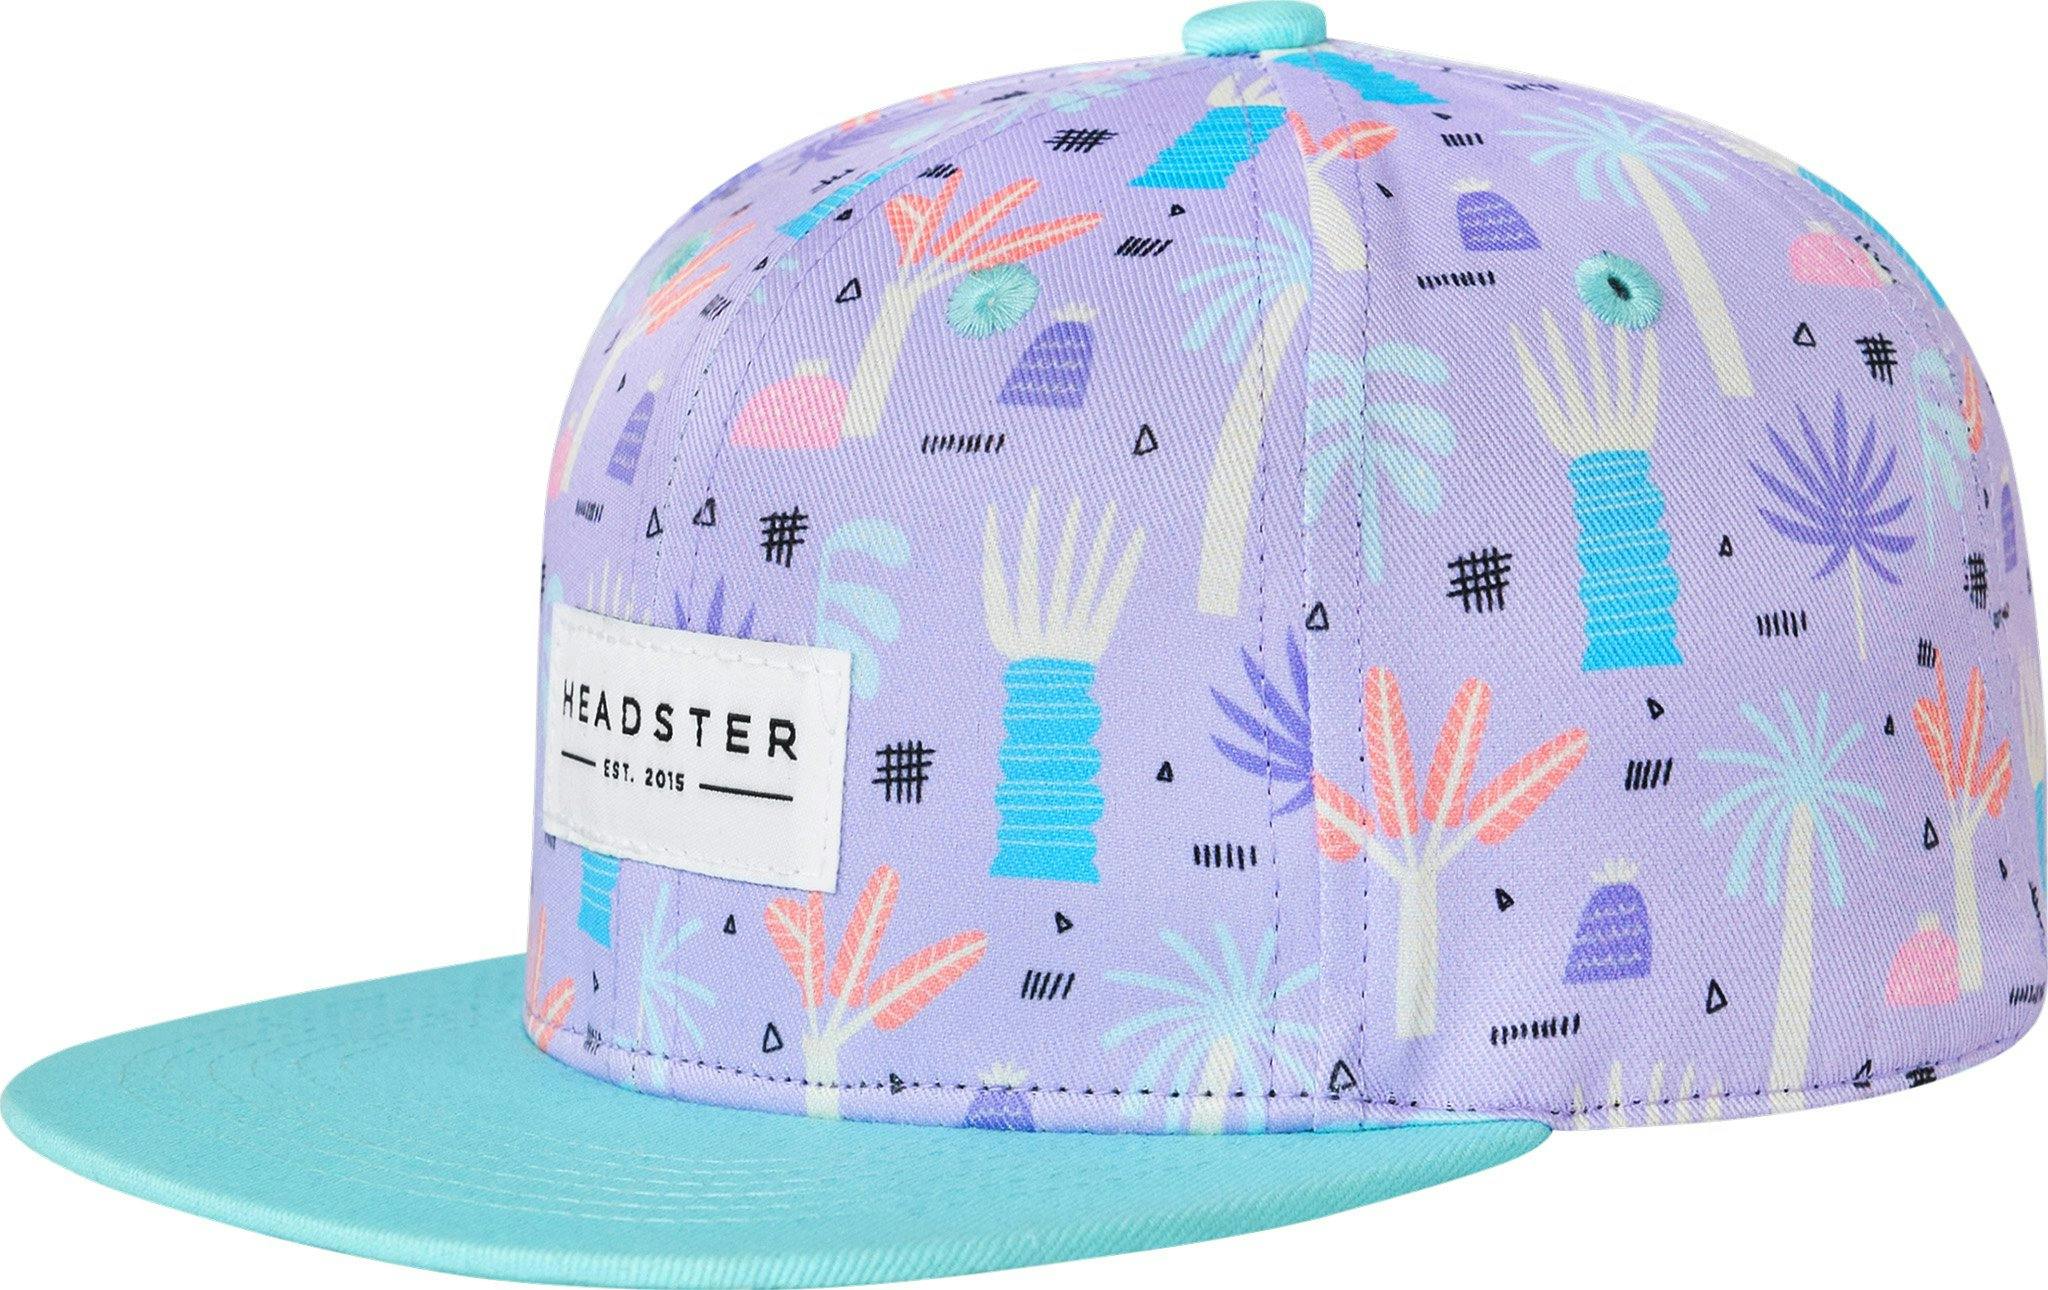 Product image for Jungle fever Snapback Cap - Kids